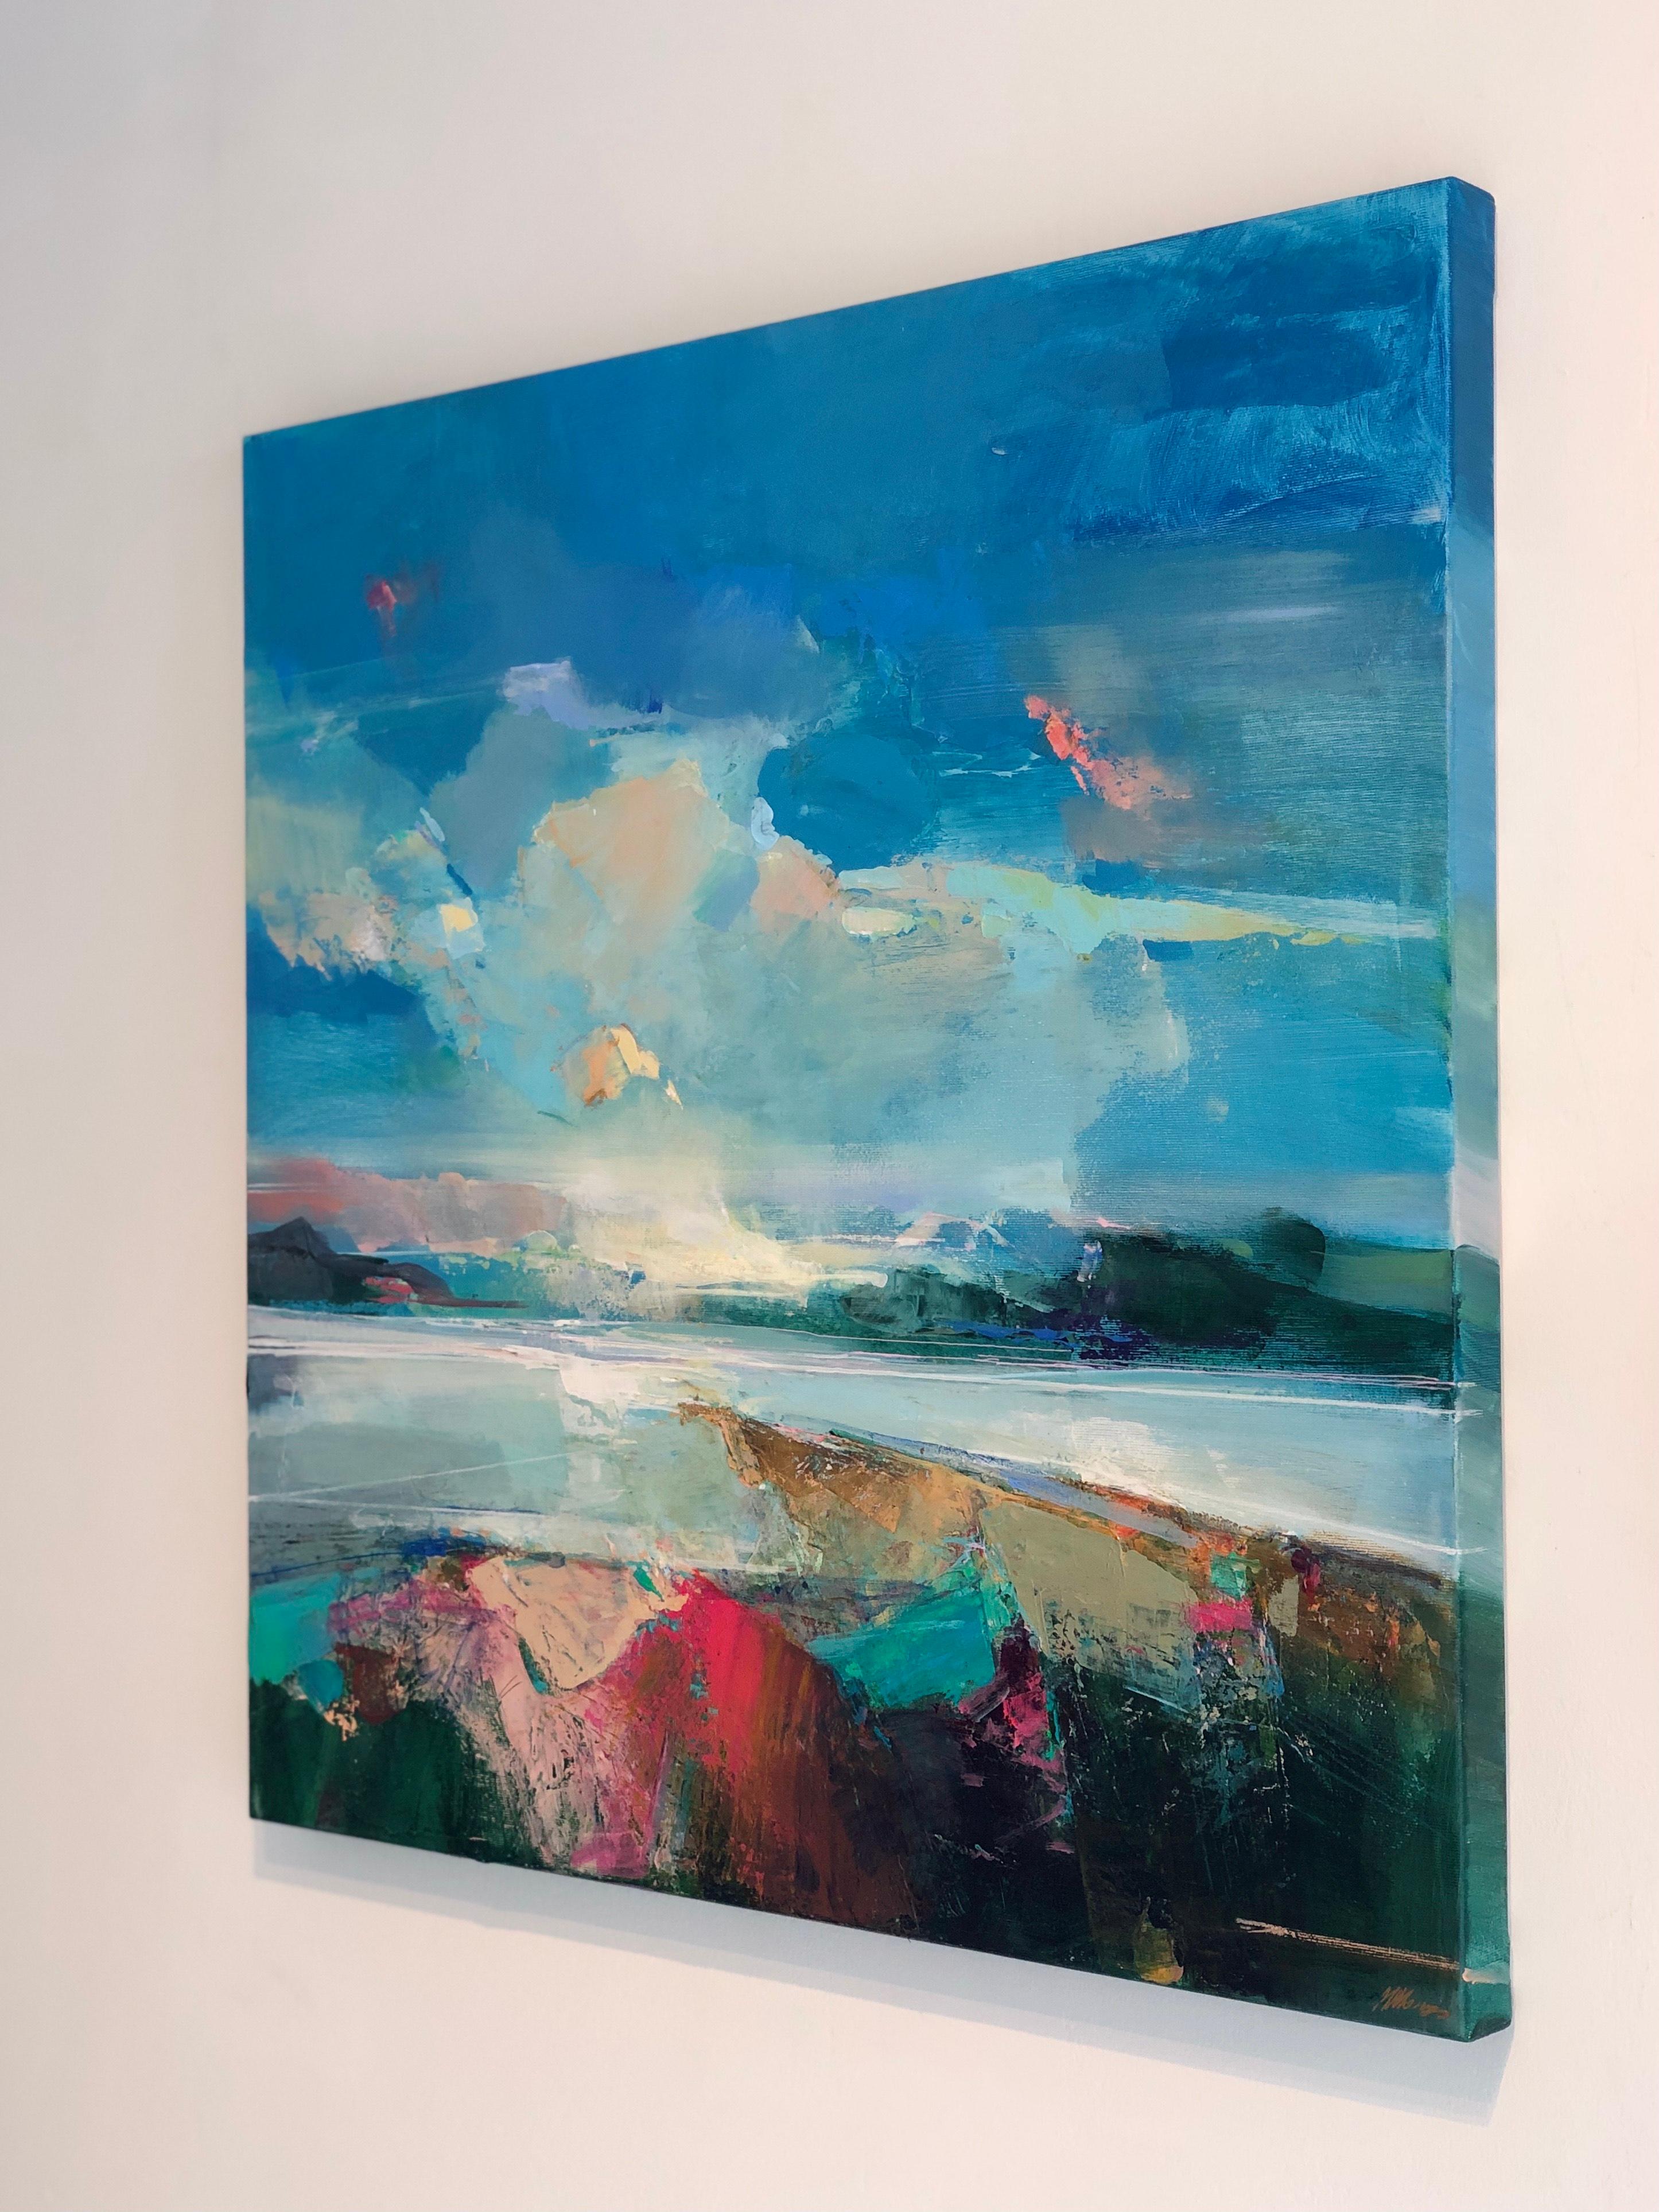 Along the Estuary 7 - original abstract seascape painting- contemporary Artwork - Abstract Expressionist Painting by Magdalena Morey